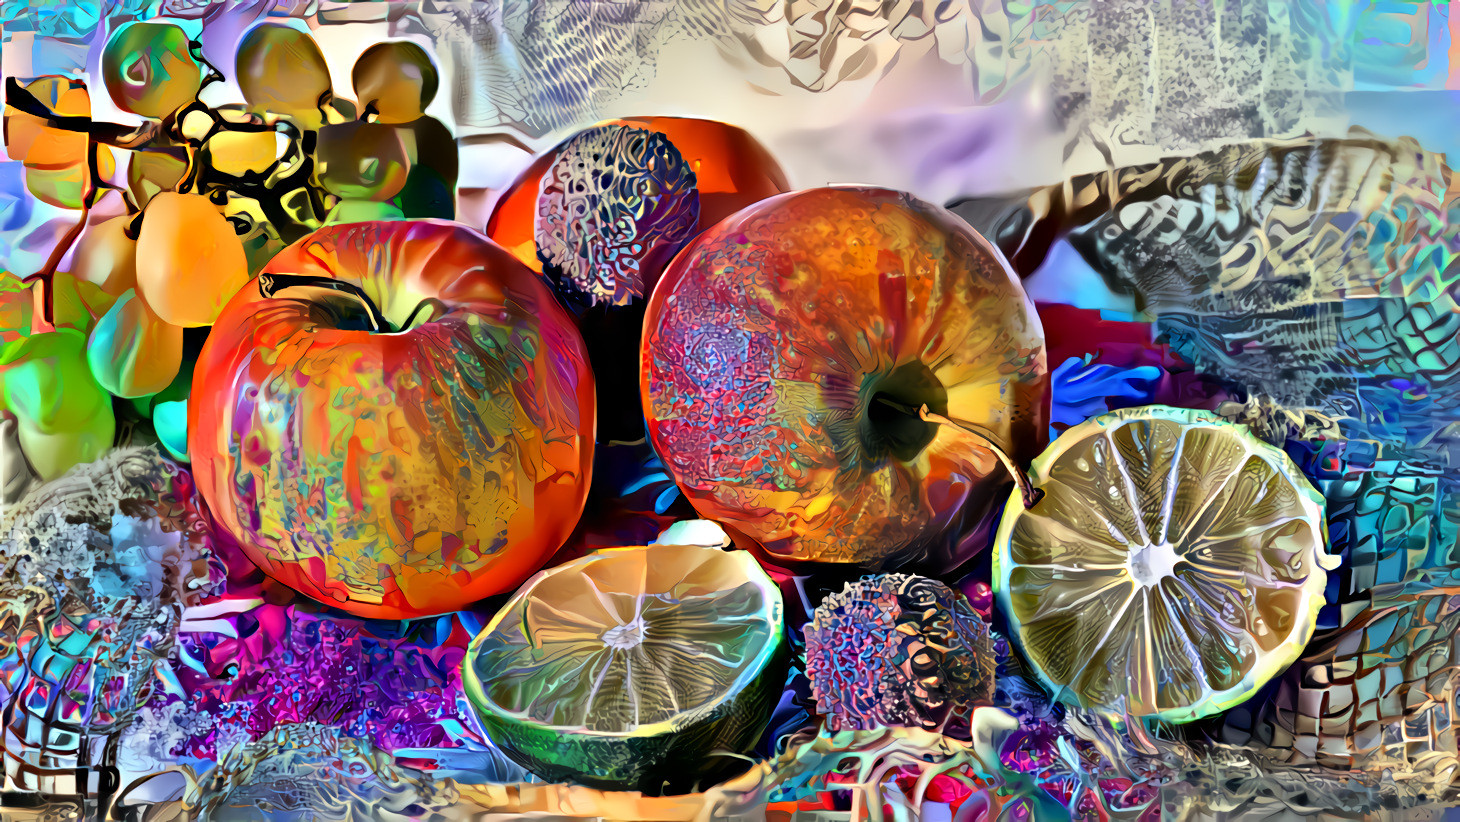 Fruit Still Life (Image by RitaE from Pixabay)